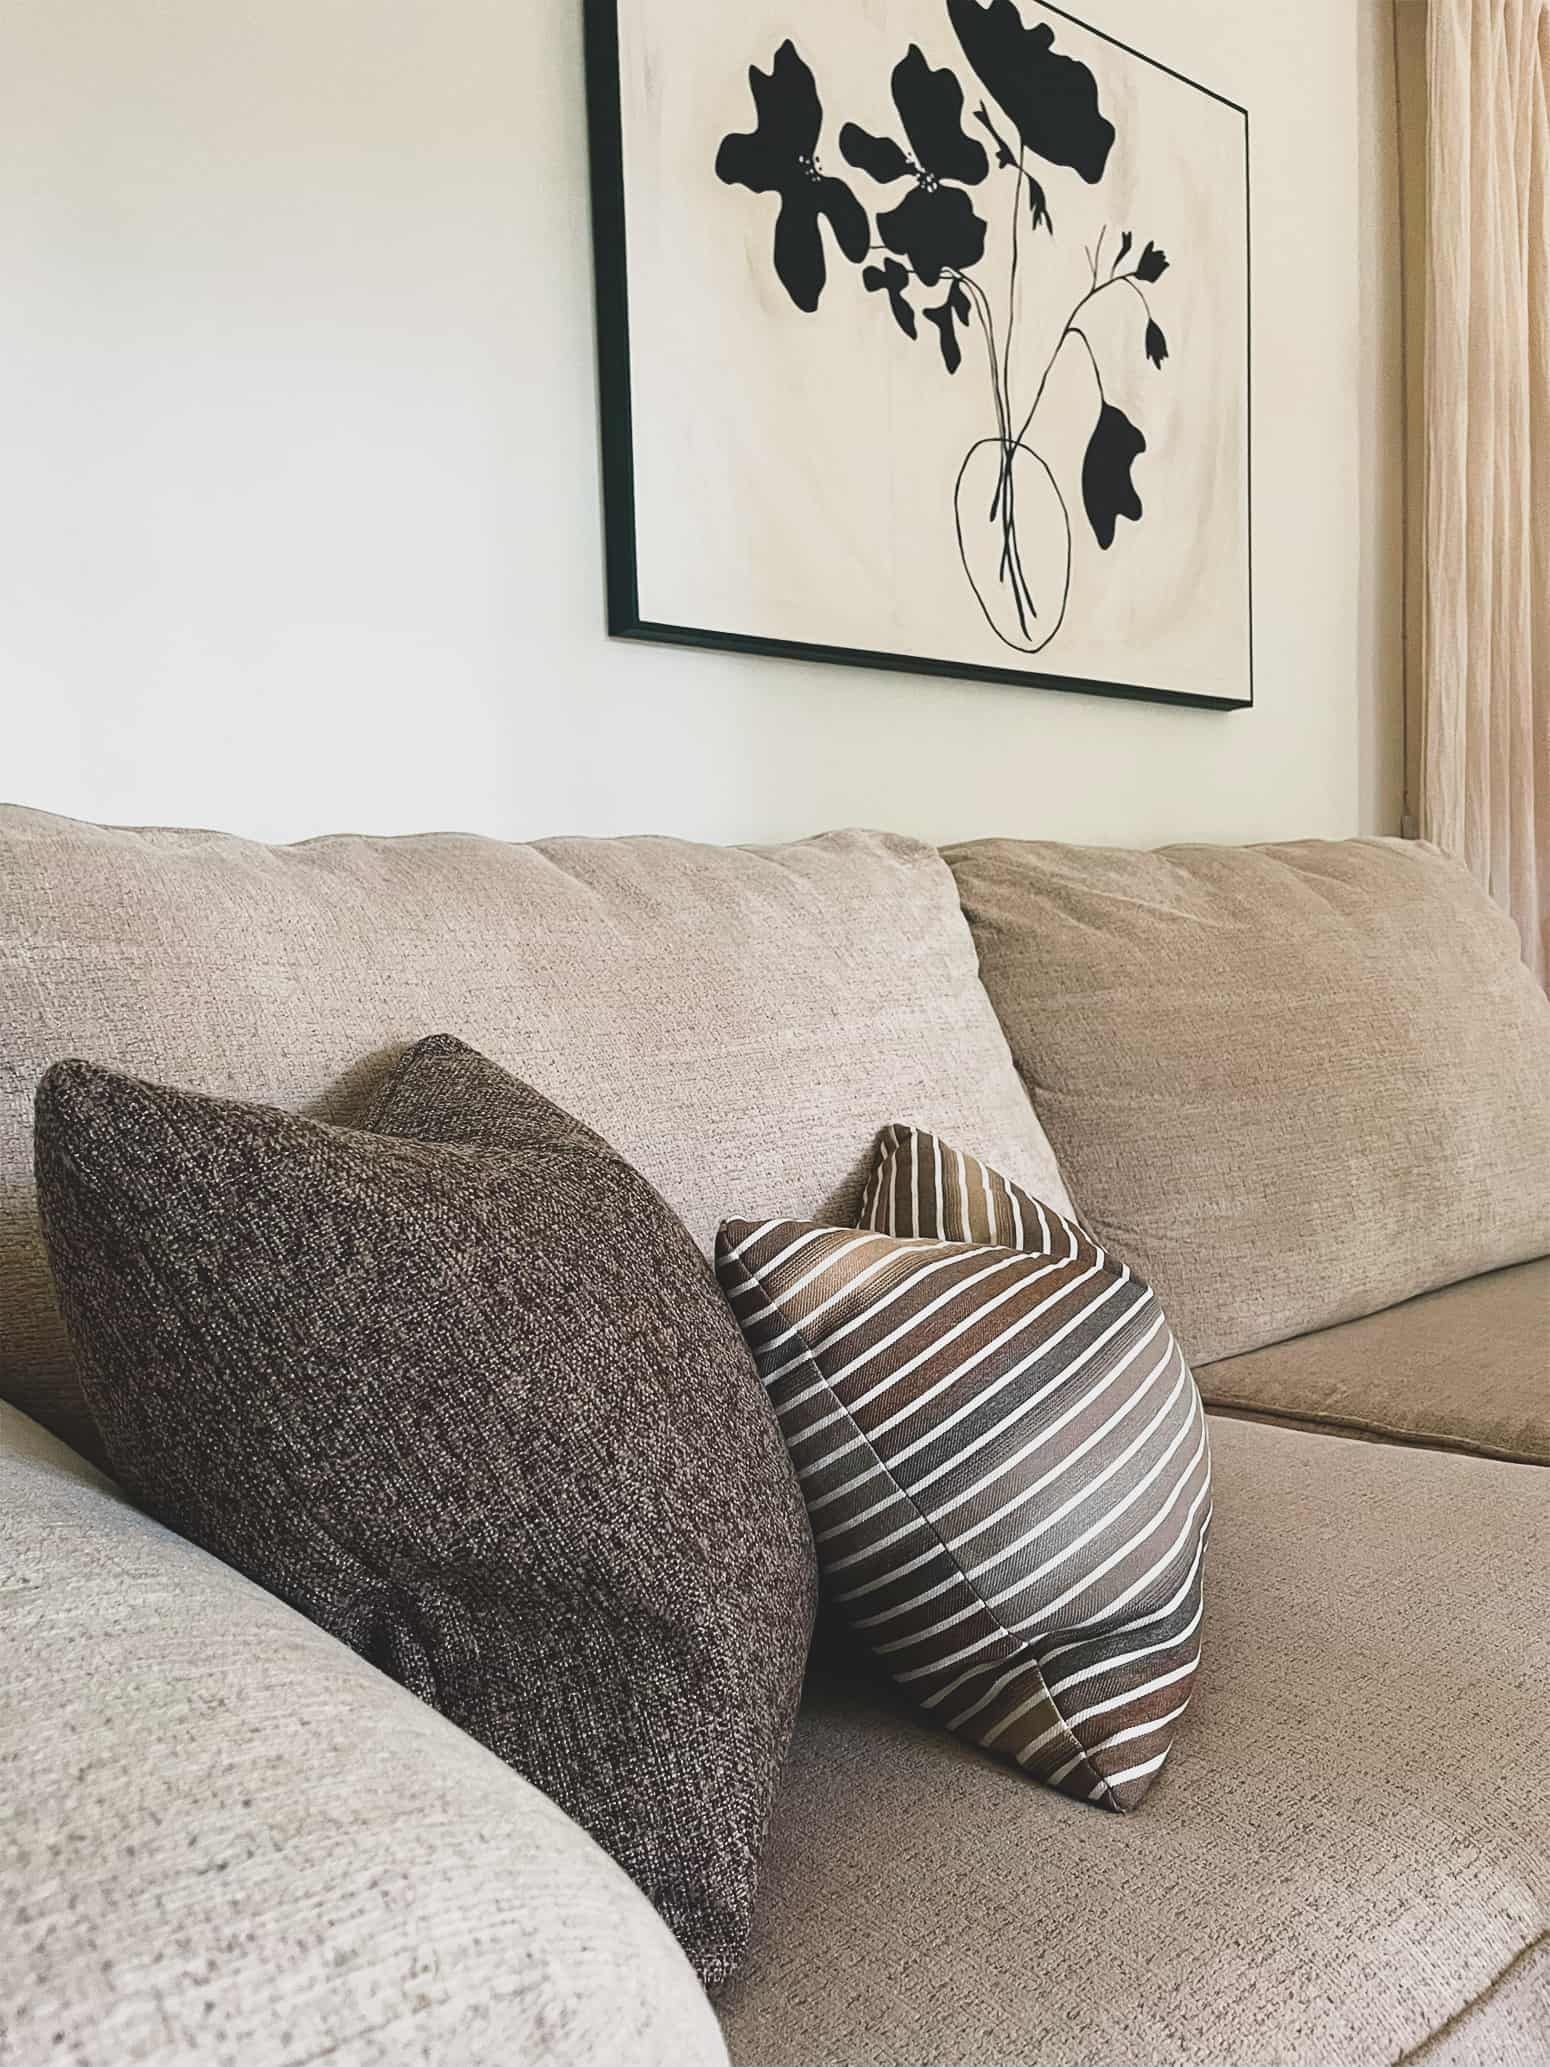 A set of throw pillows in brown earthy tones are placed on cream sofa and styled with minimalist decor